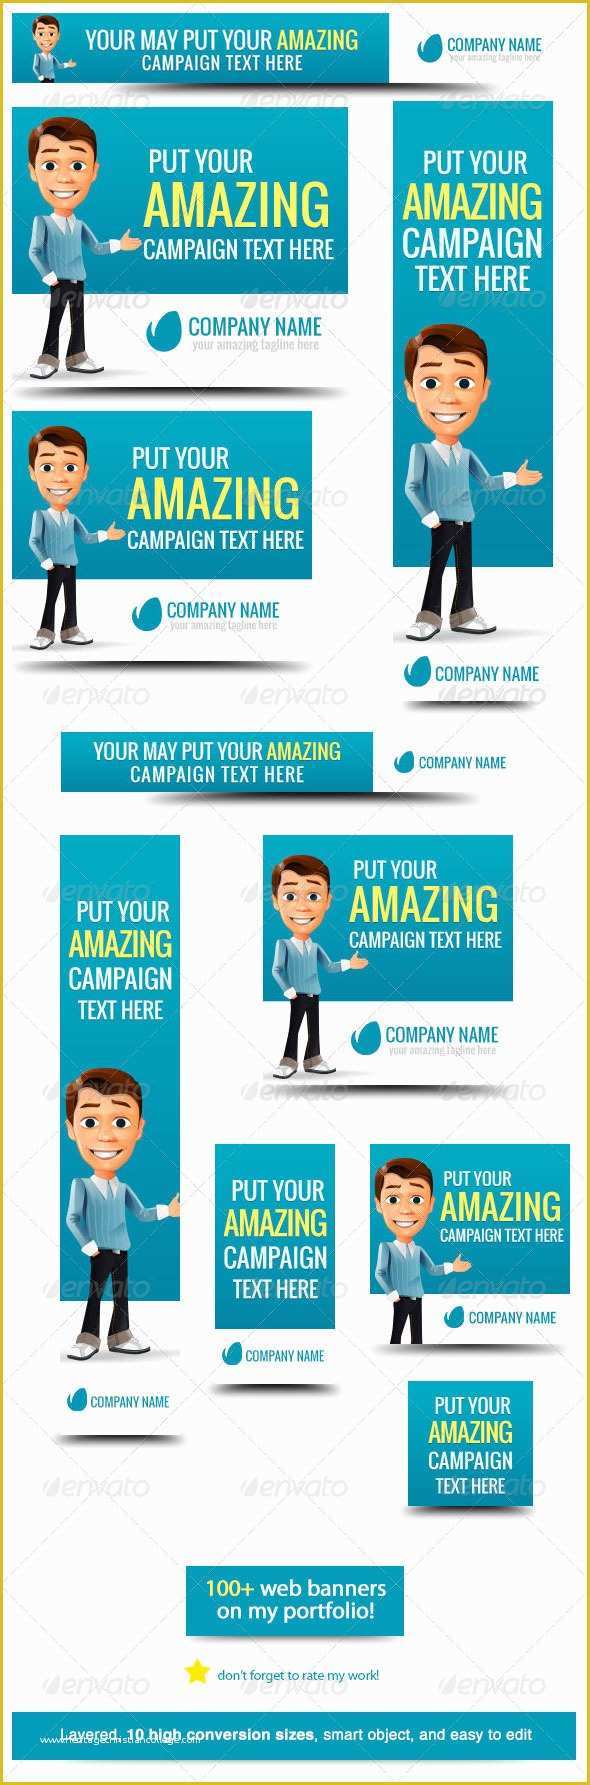 Free Business Advertising Templates Of Business Cartoon Web Banner Graphicriver Business Cartoon